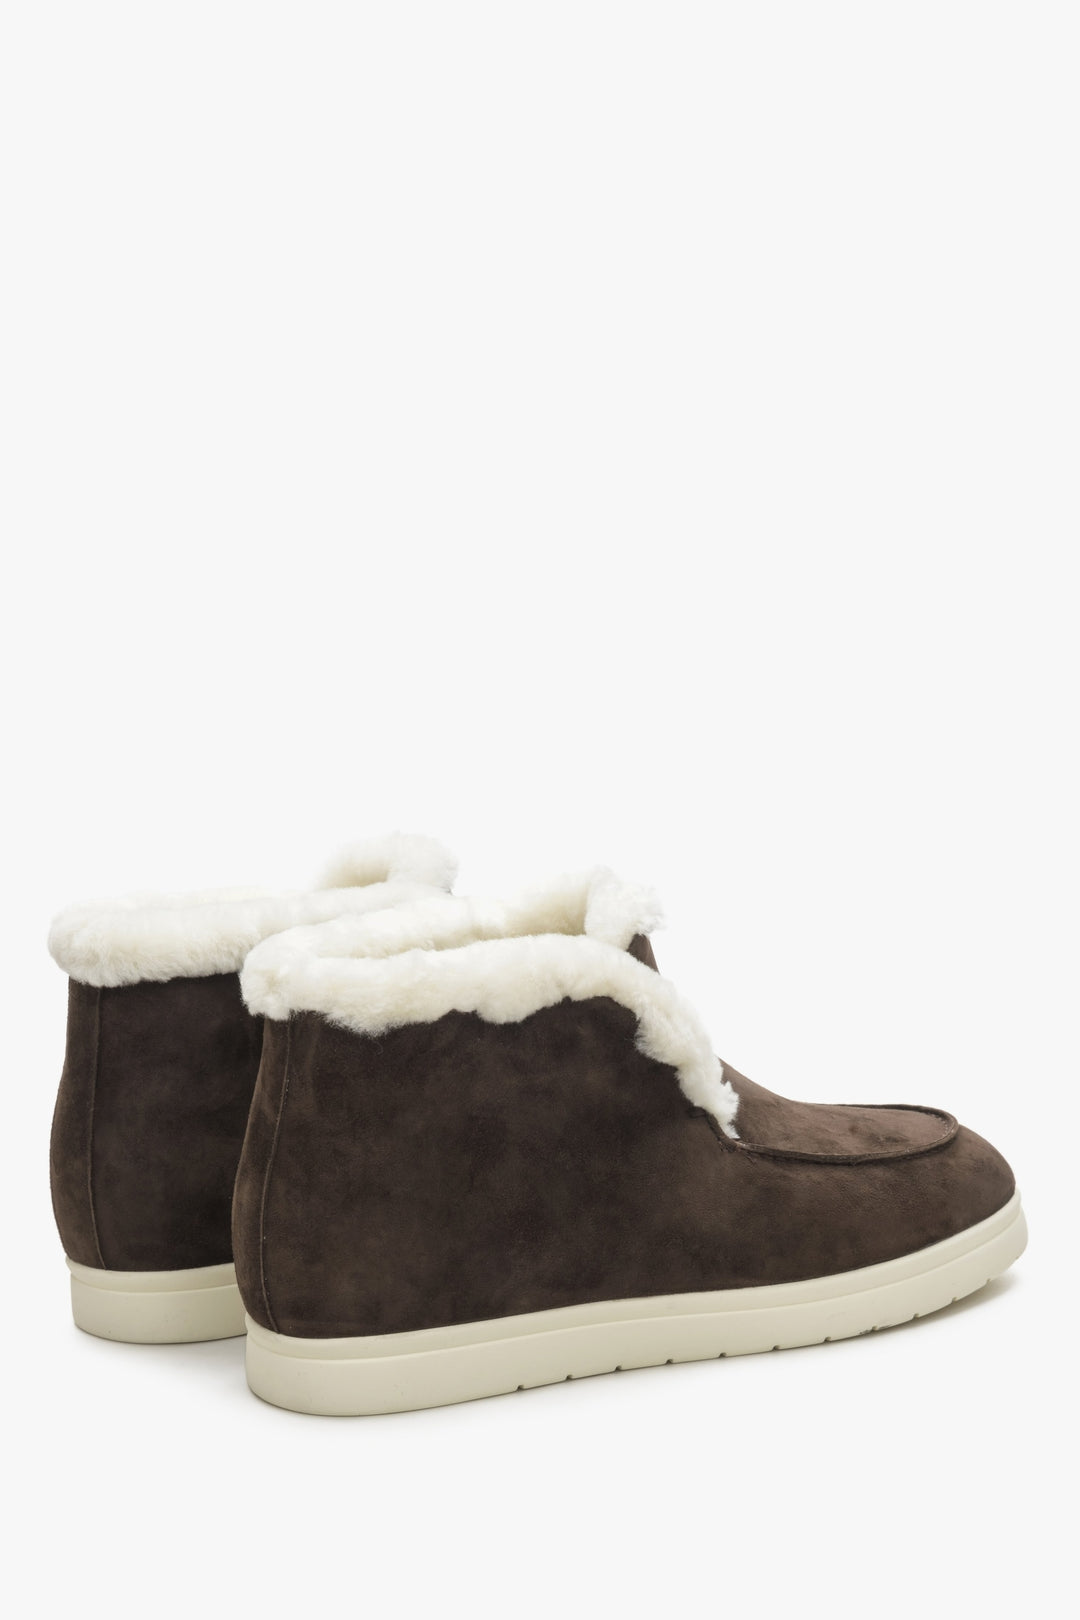 Slip on low-top boots in saddle brown colour made of velour and fur.